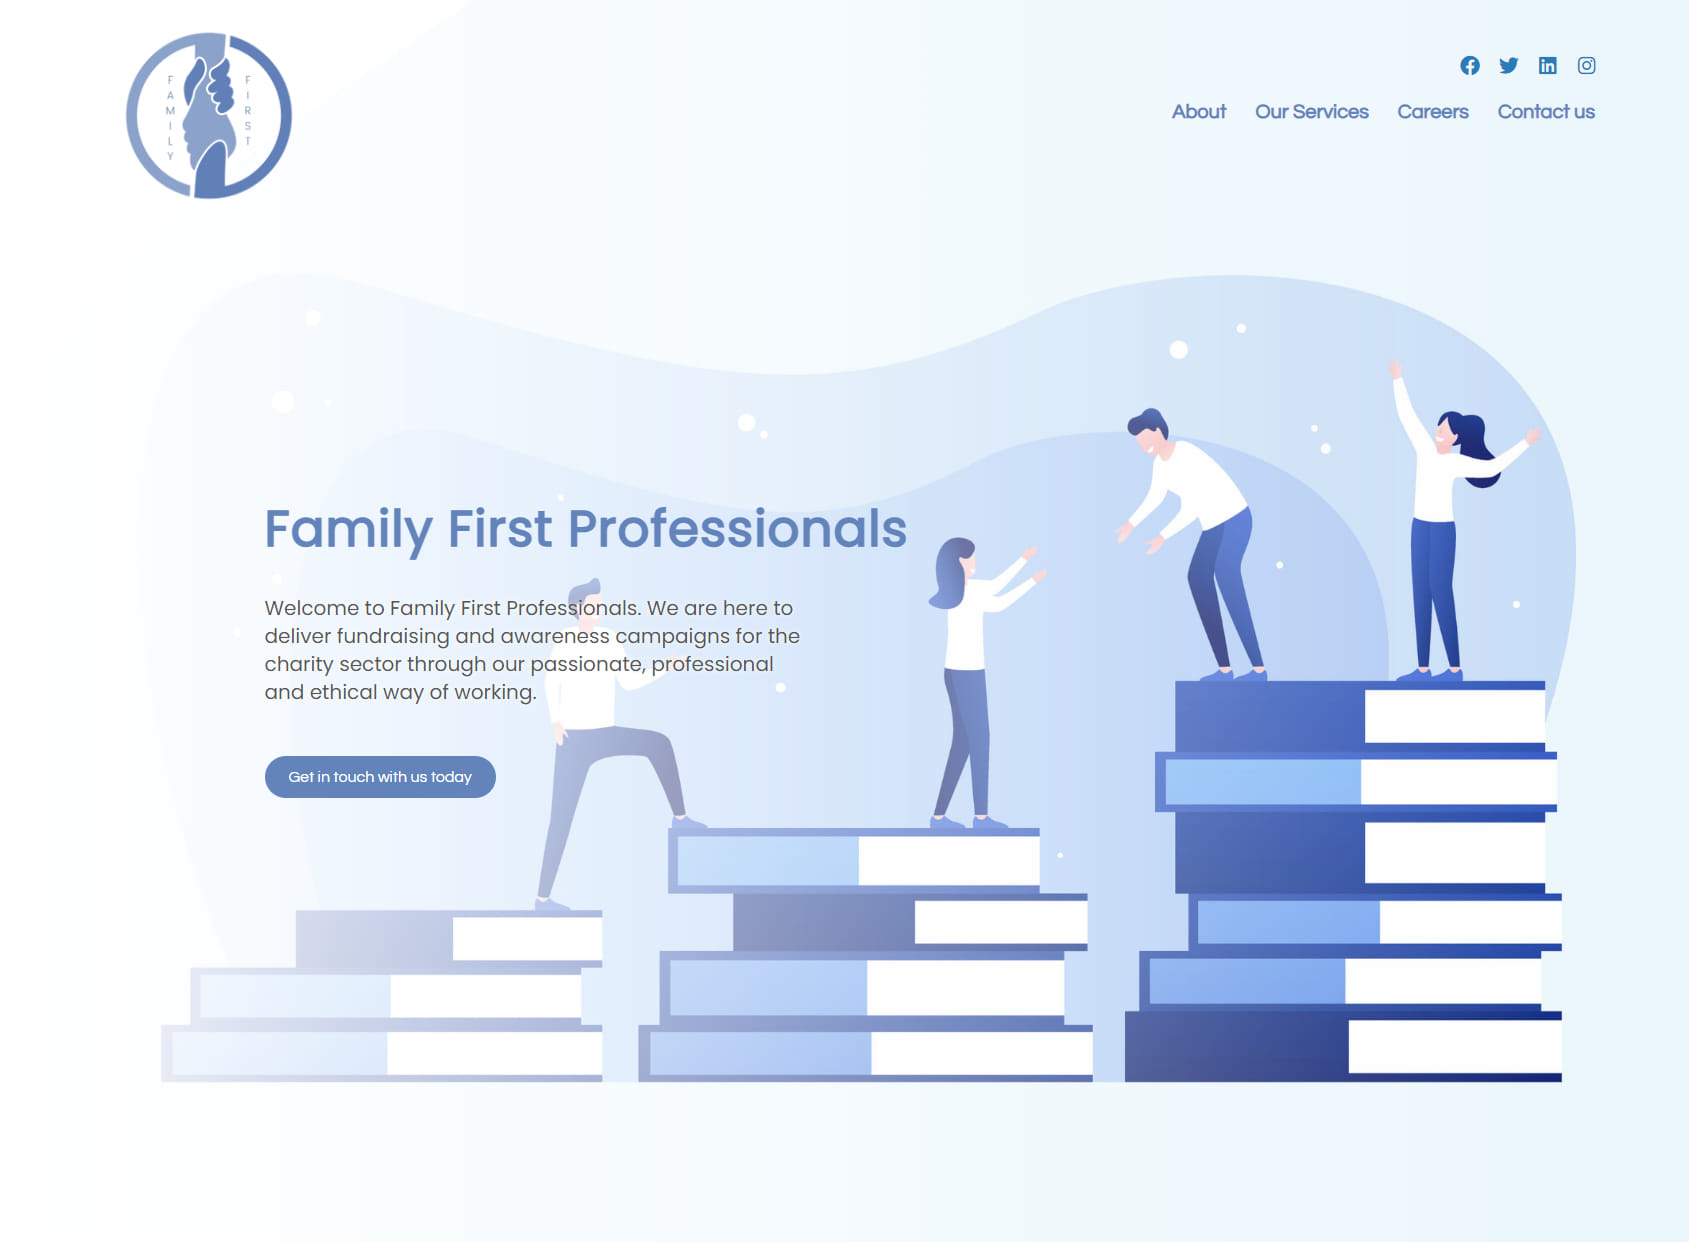 Family First Professionals